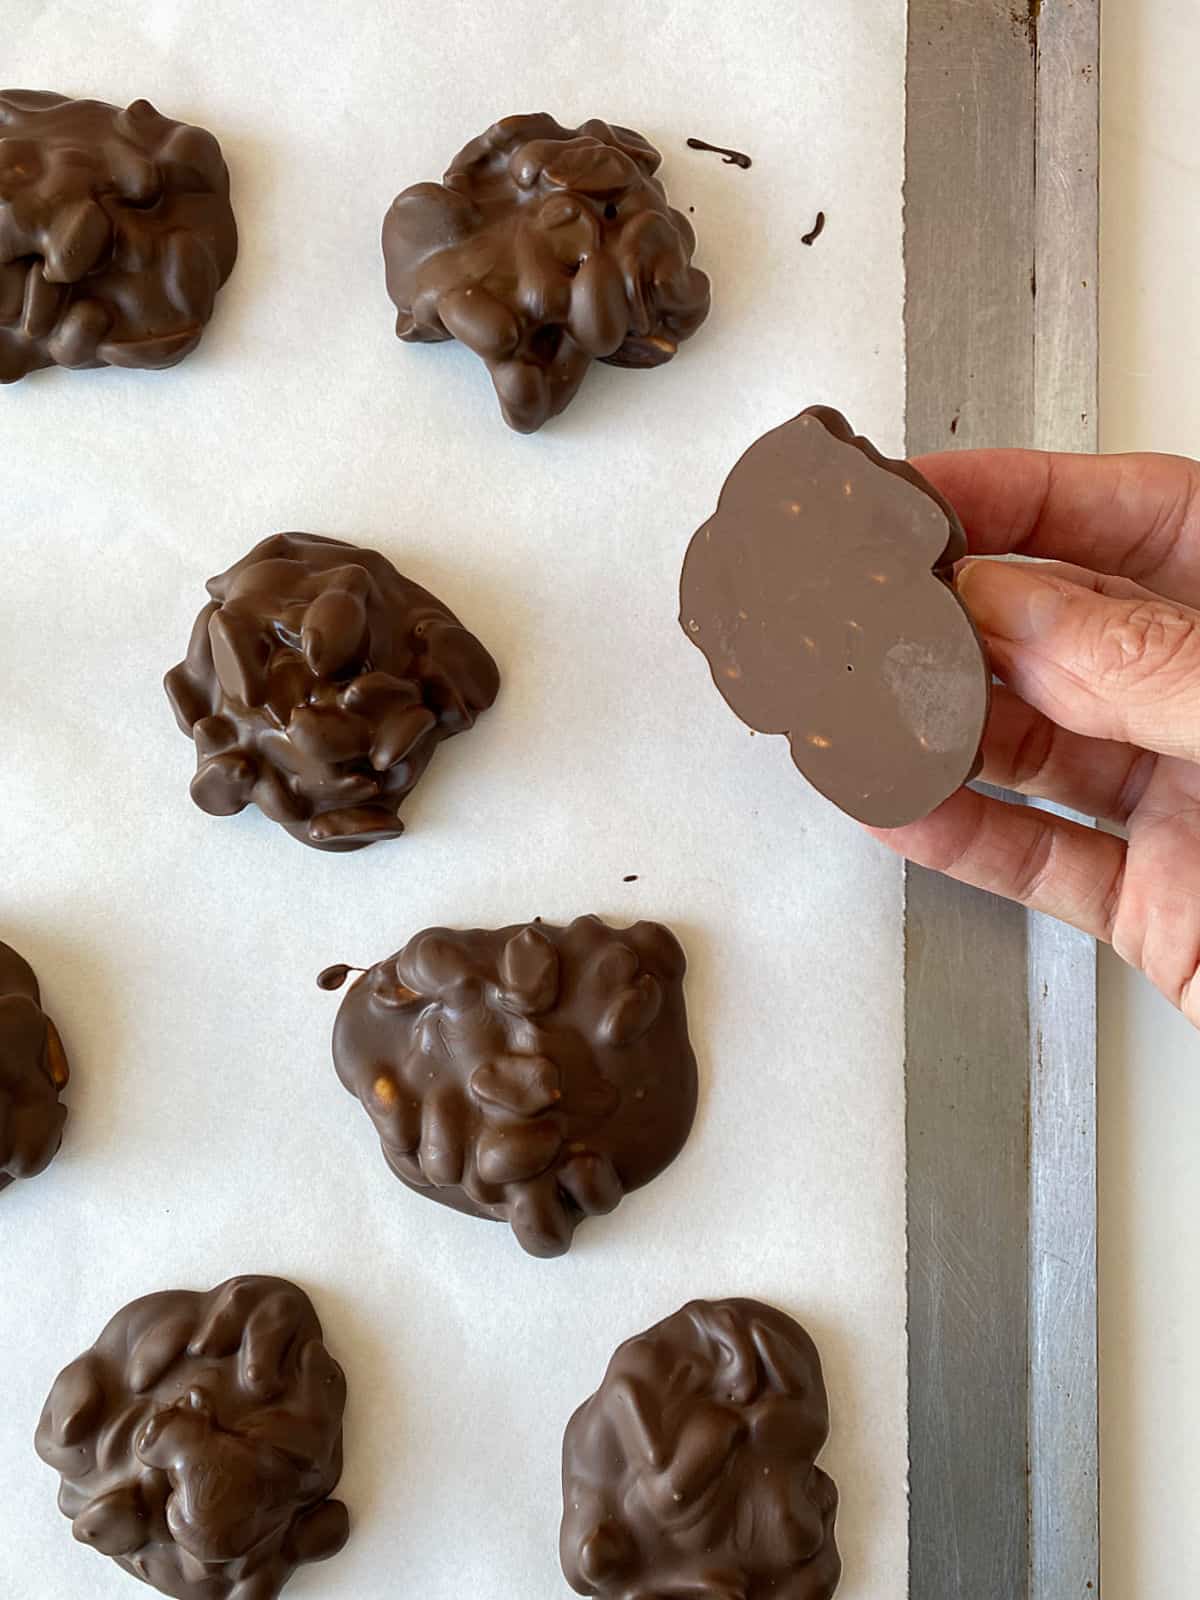 Several chocolate peanut clusters on white parchment and hand showing bottom of one of them